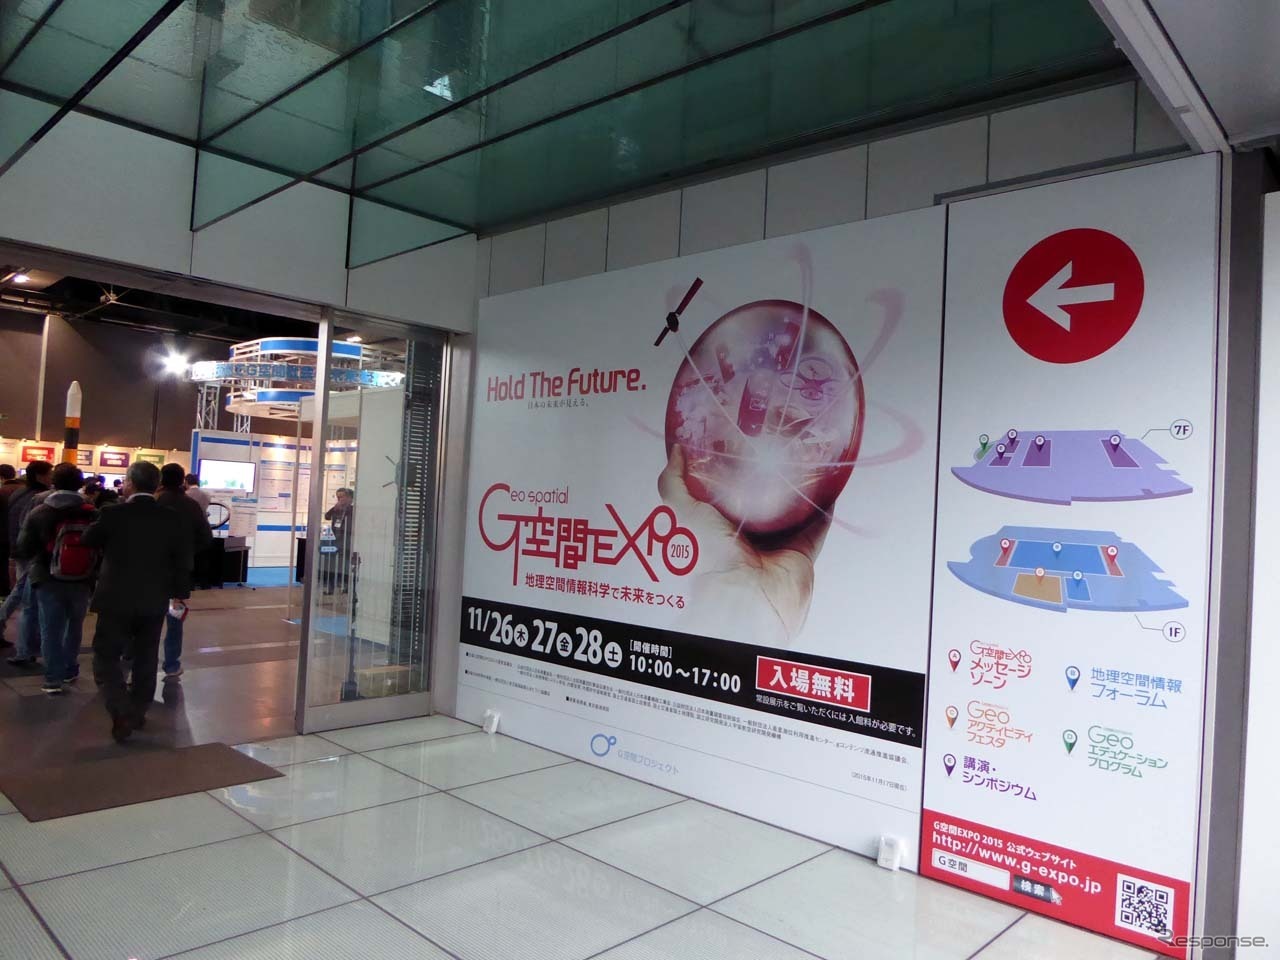 「G空間EXPO15」